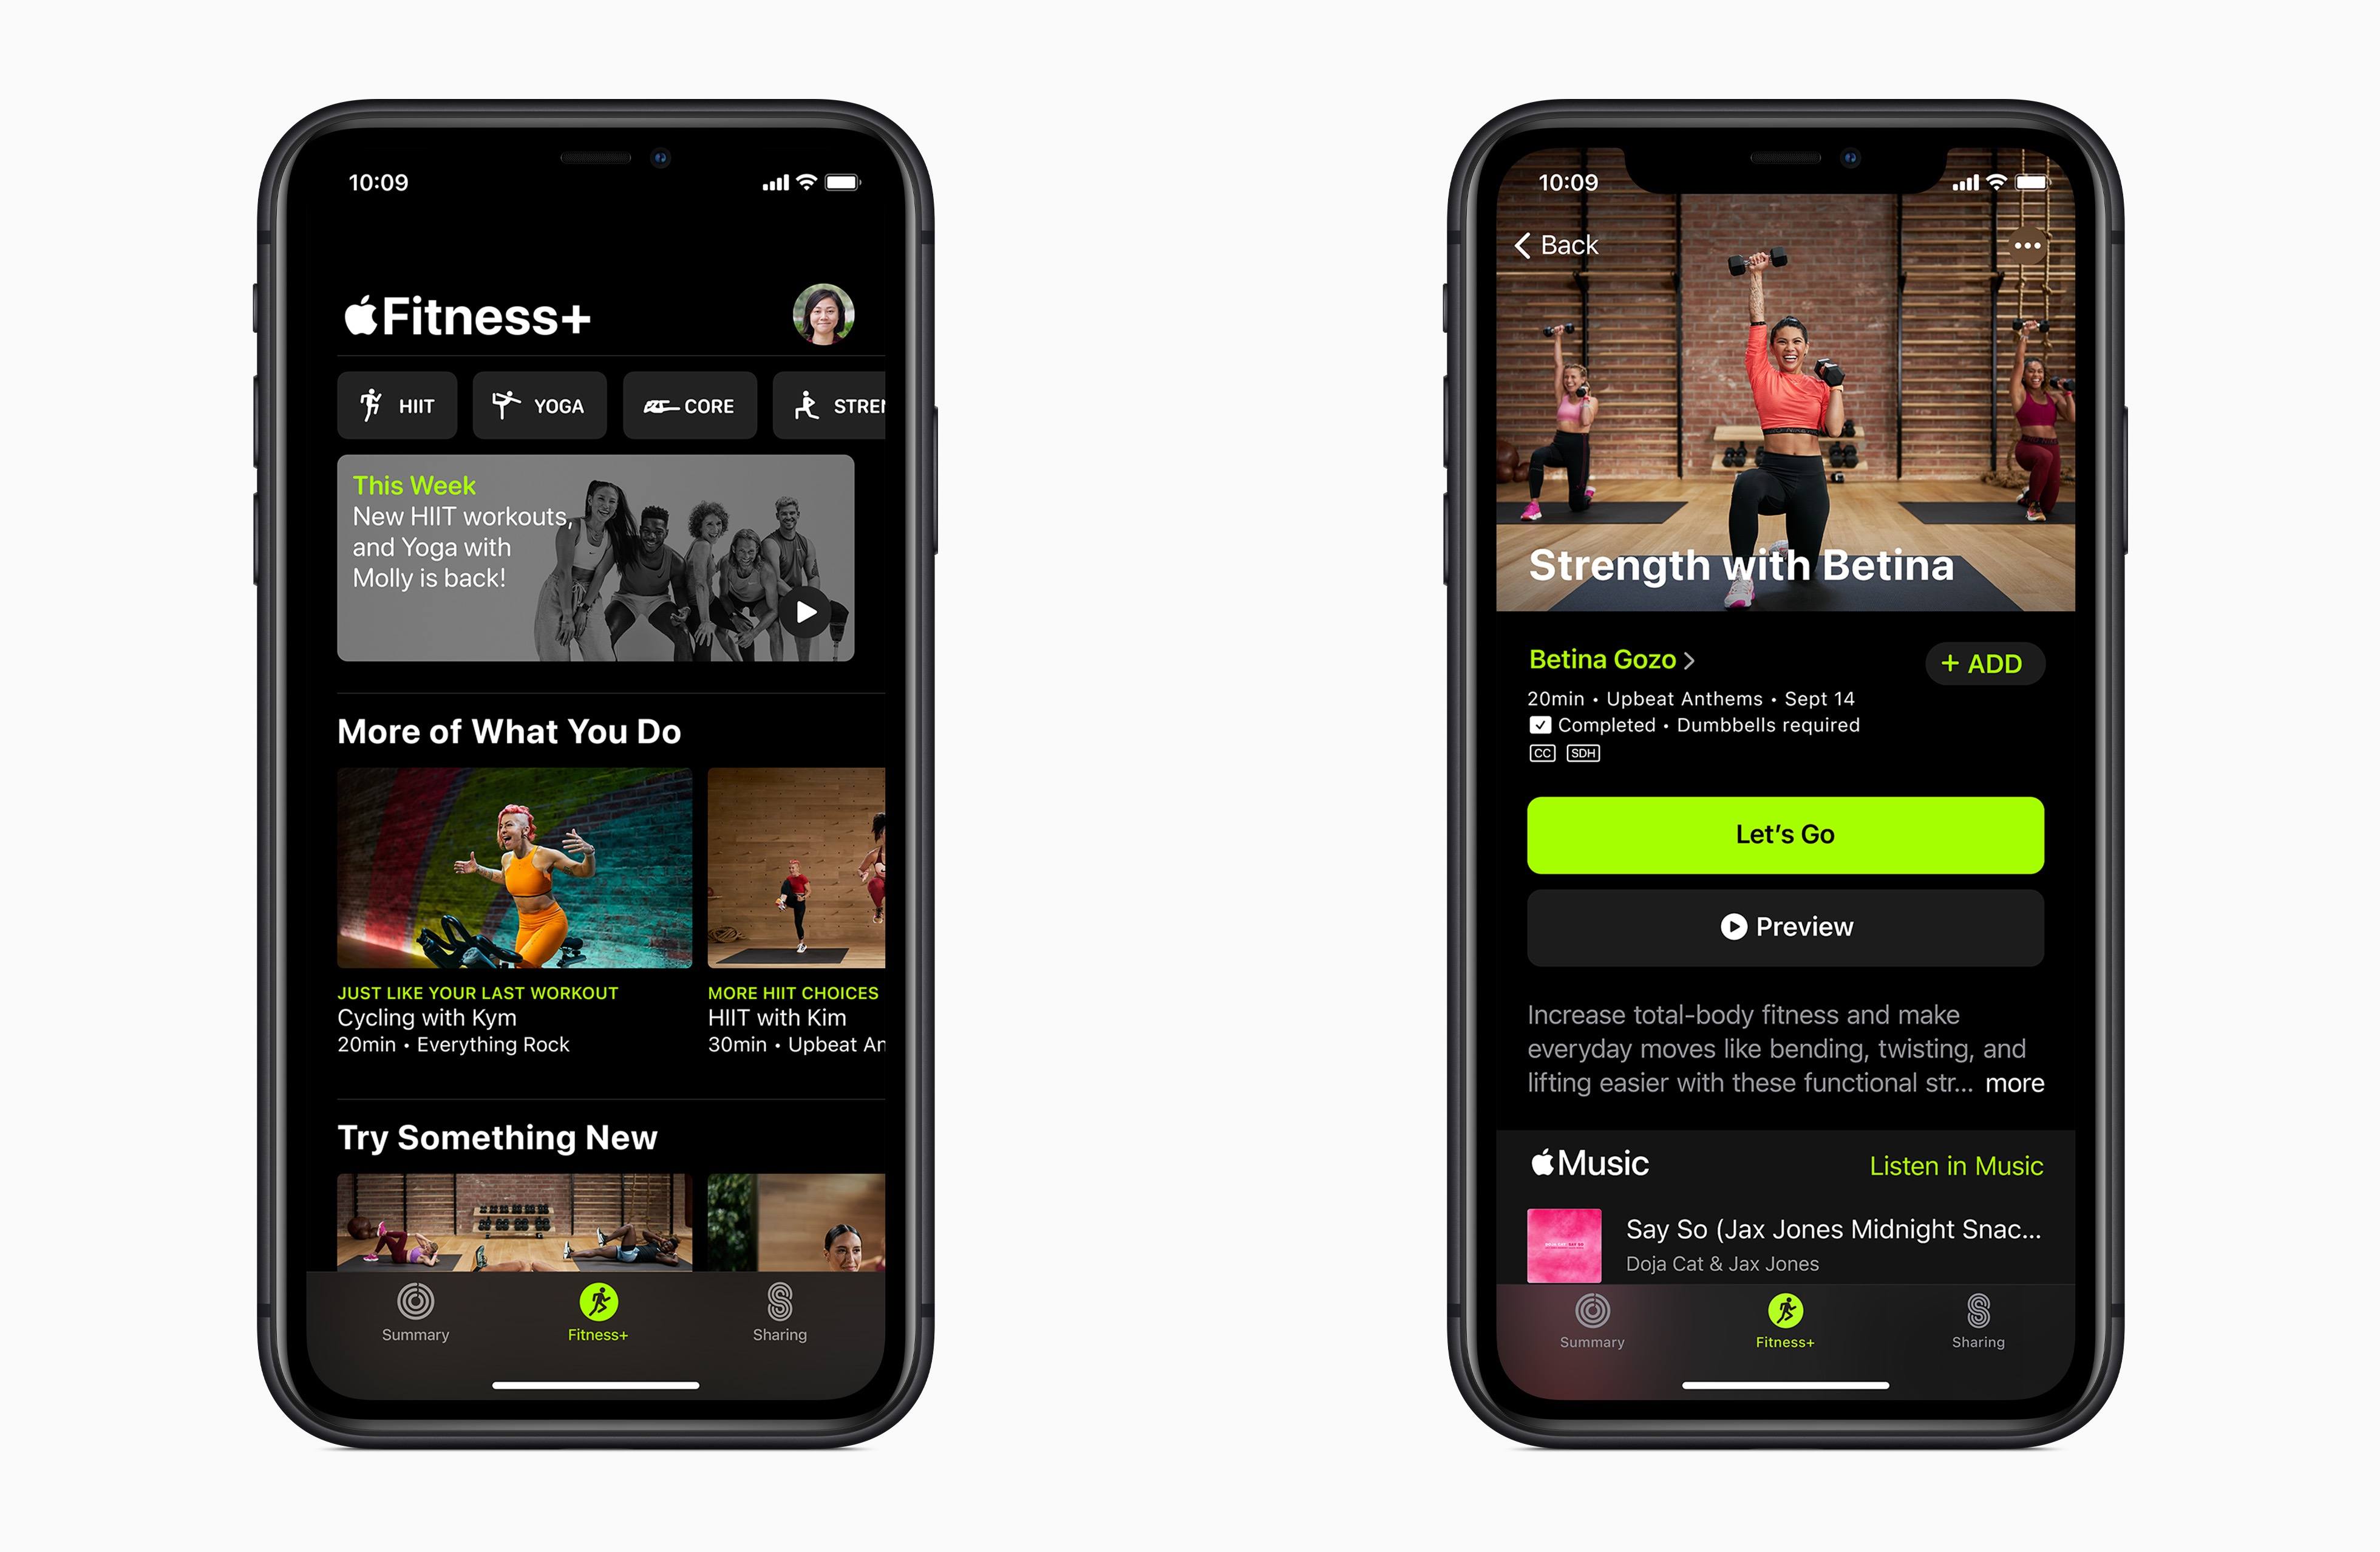 Fitness+ will live inside the Fitness app.